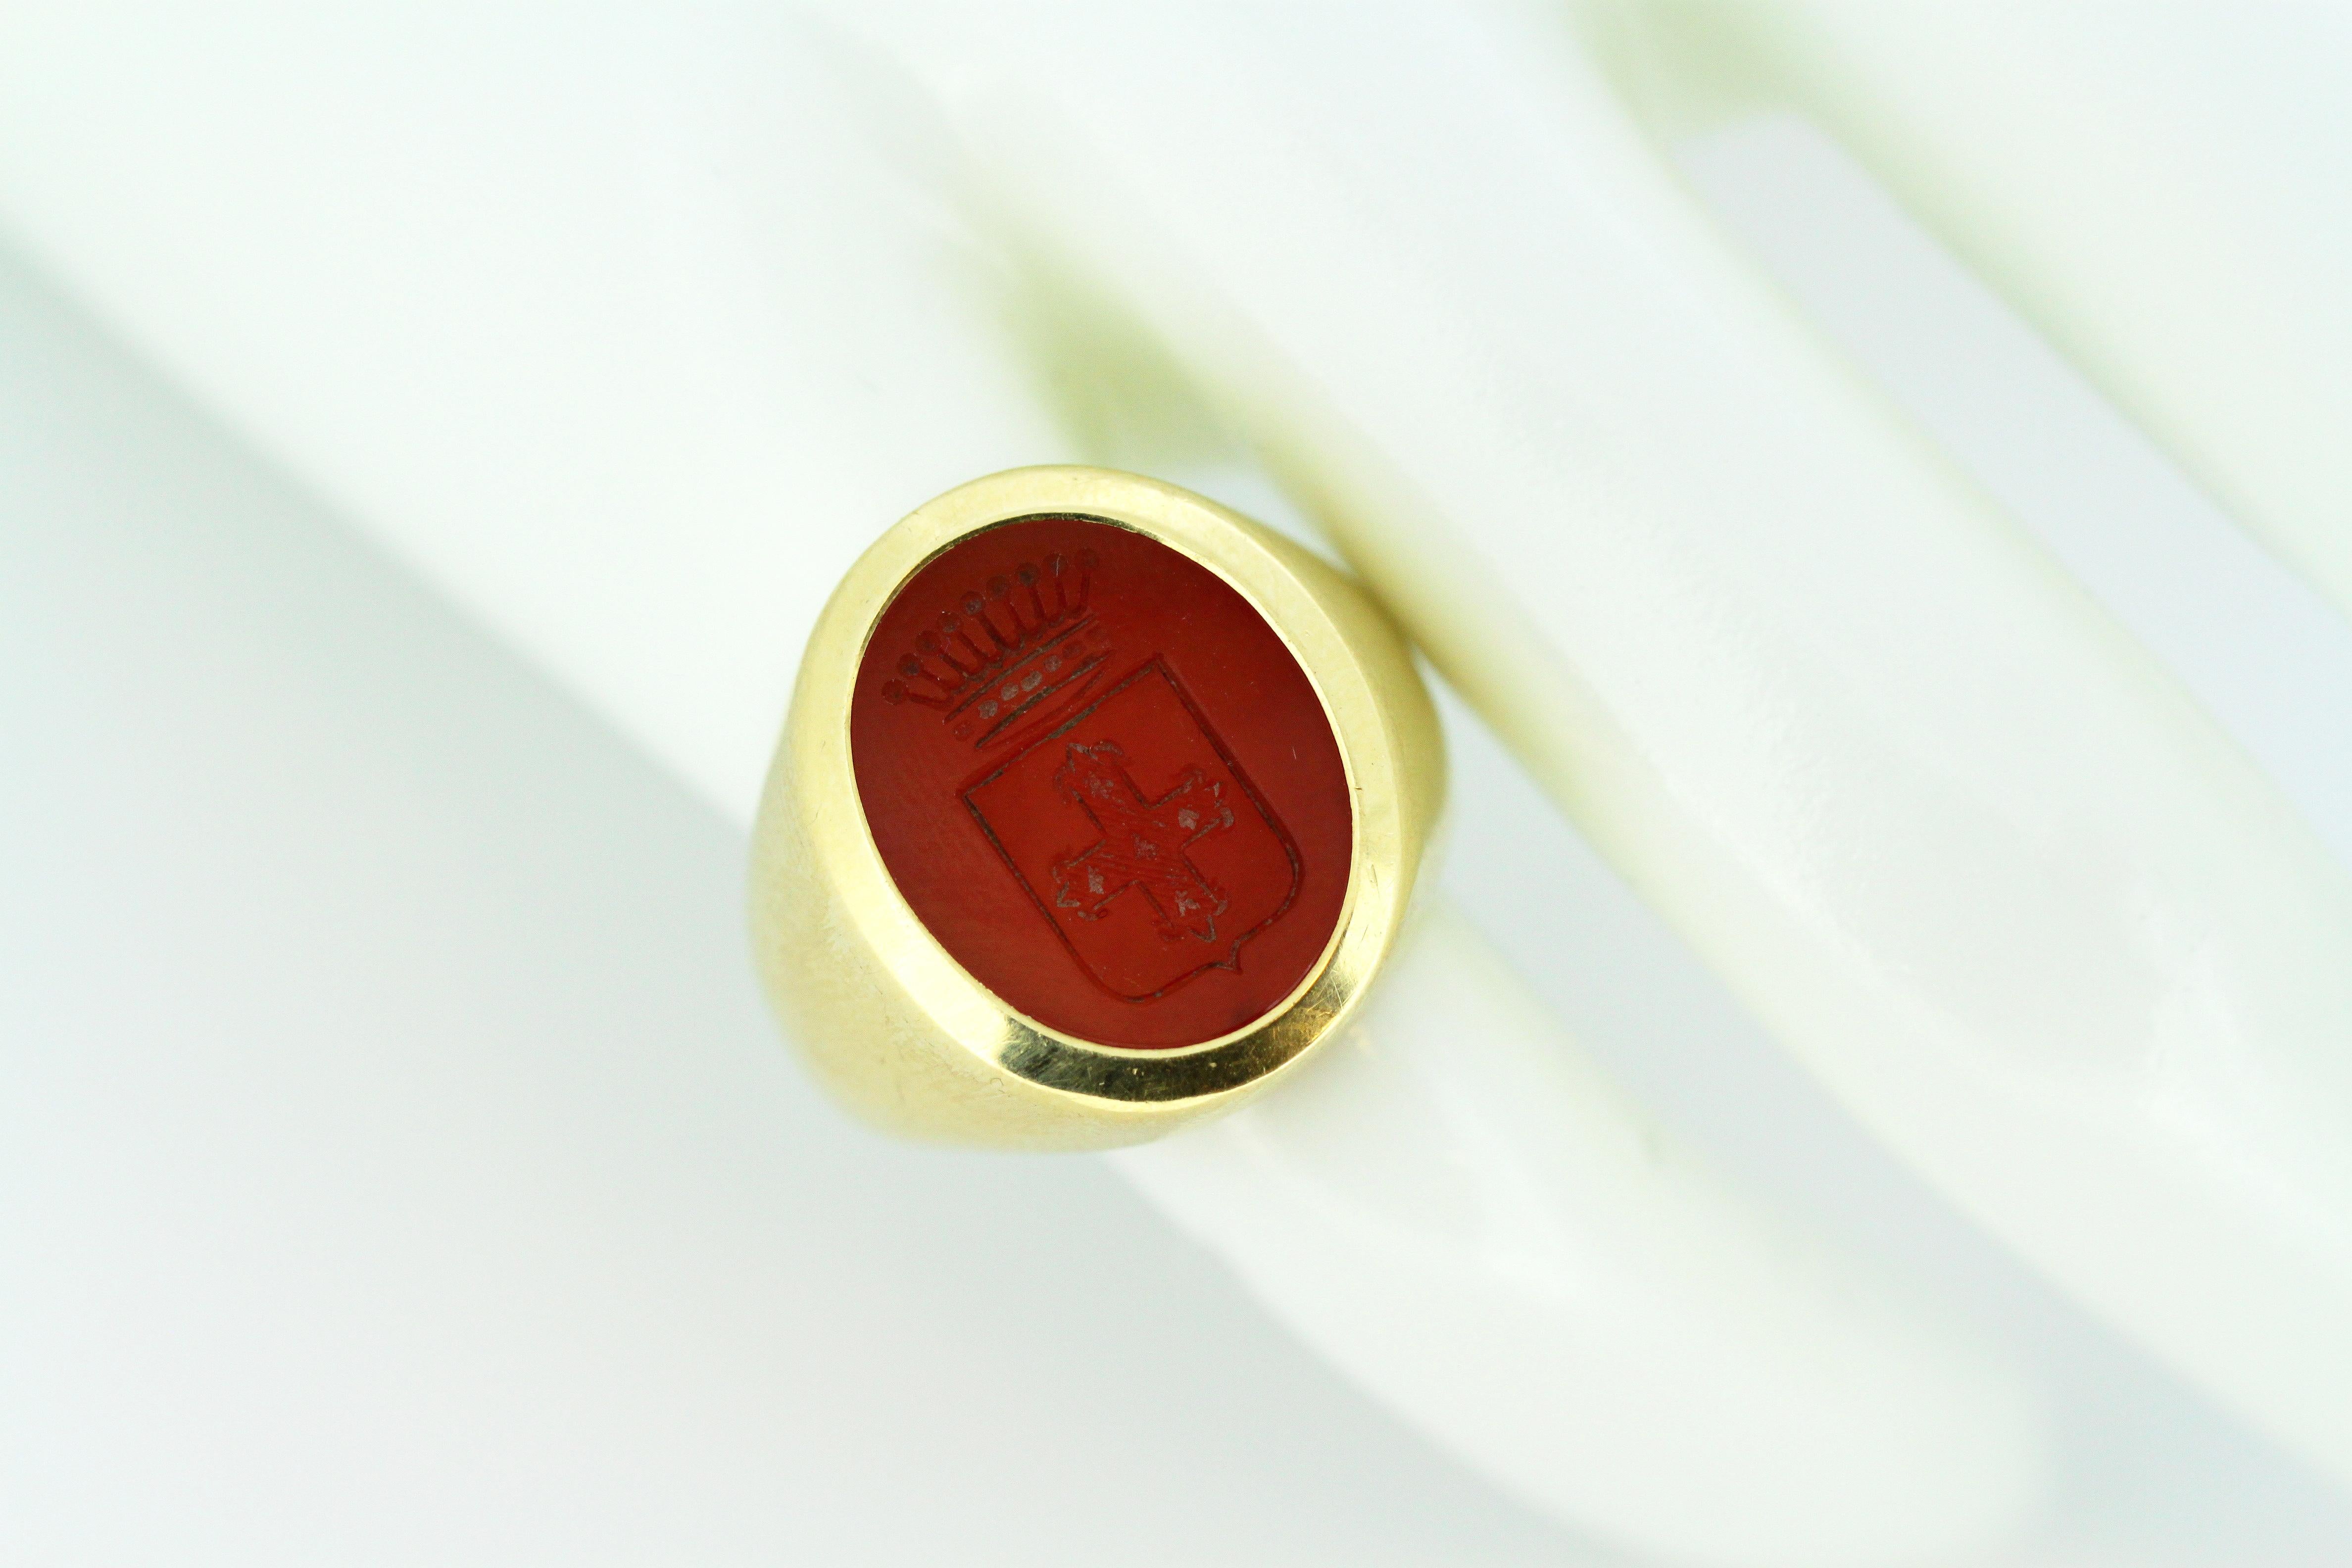 18kt yellow gold men's ring with carnelian seal with coats of arms
Hallmarked 750
Carnelian seal with coat of arms is dated late 19th century.
18kt gold ring shank is circa 1950's

Dimensions - 
Finger Size: (UK) = K (US) = 5 1/2 (EU) = 50 1/4
Ring